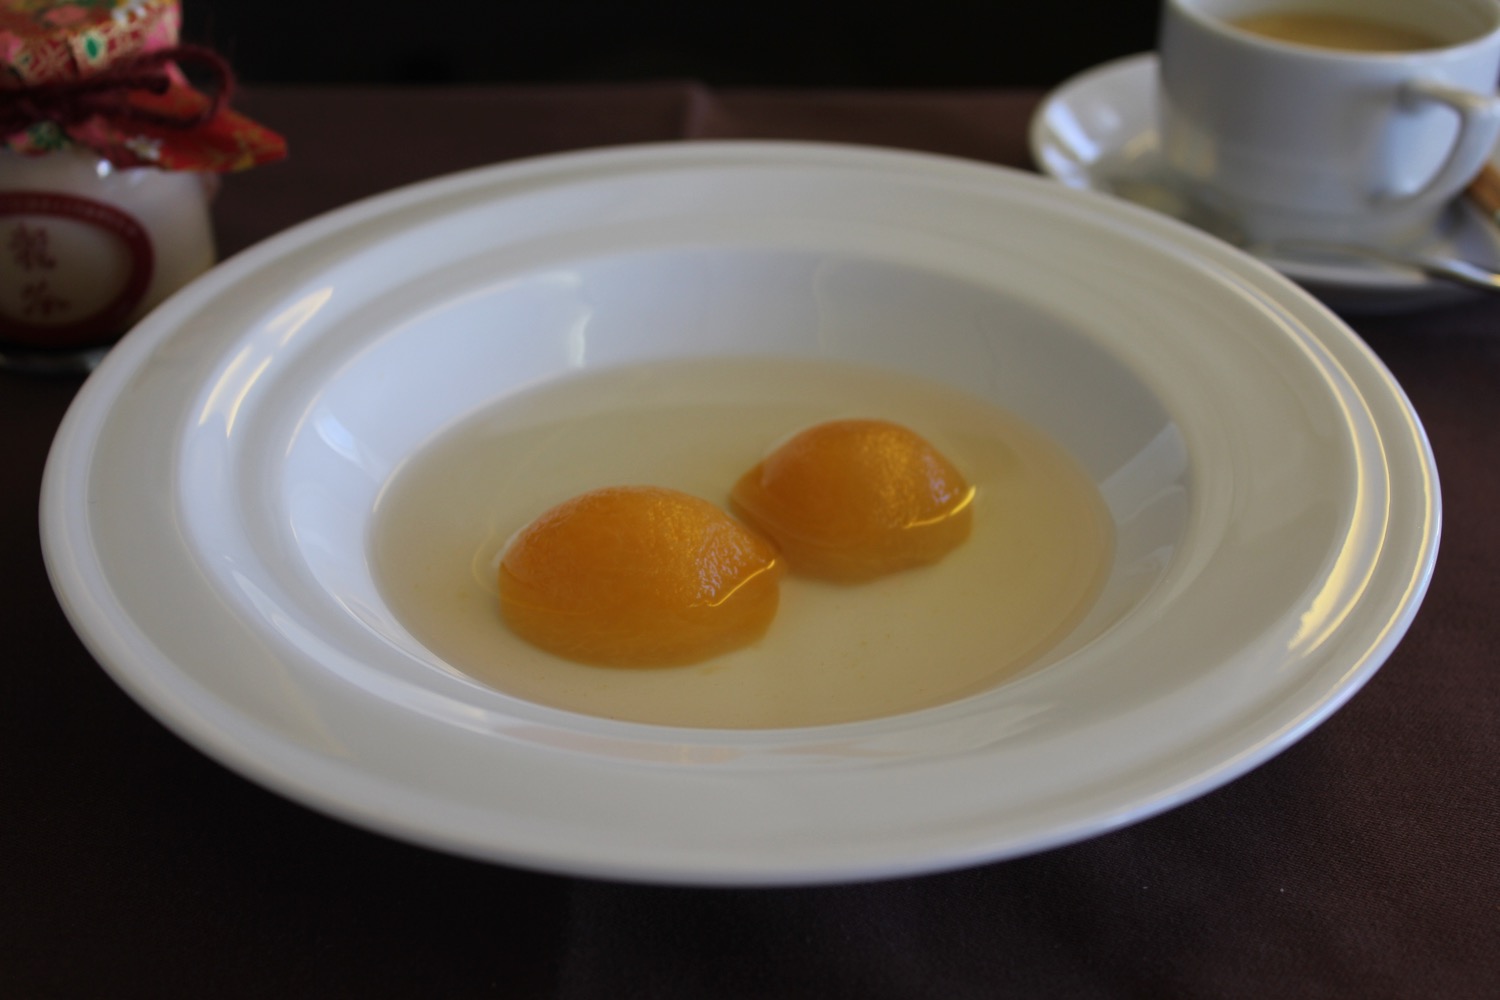 a plate of food with two oranges in it